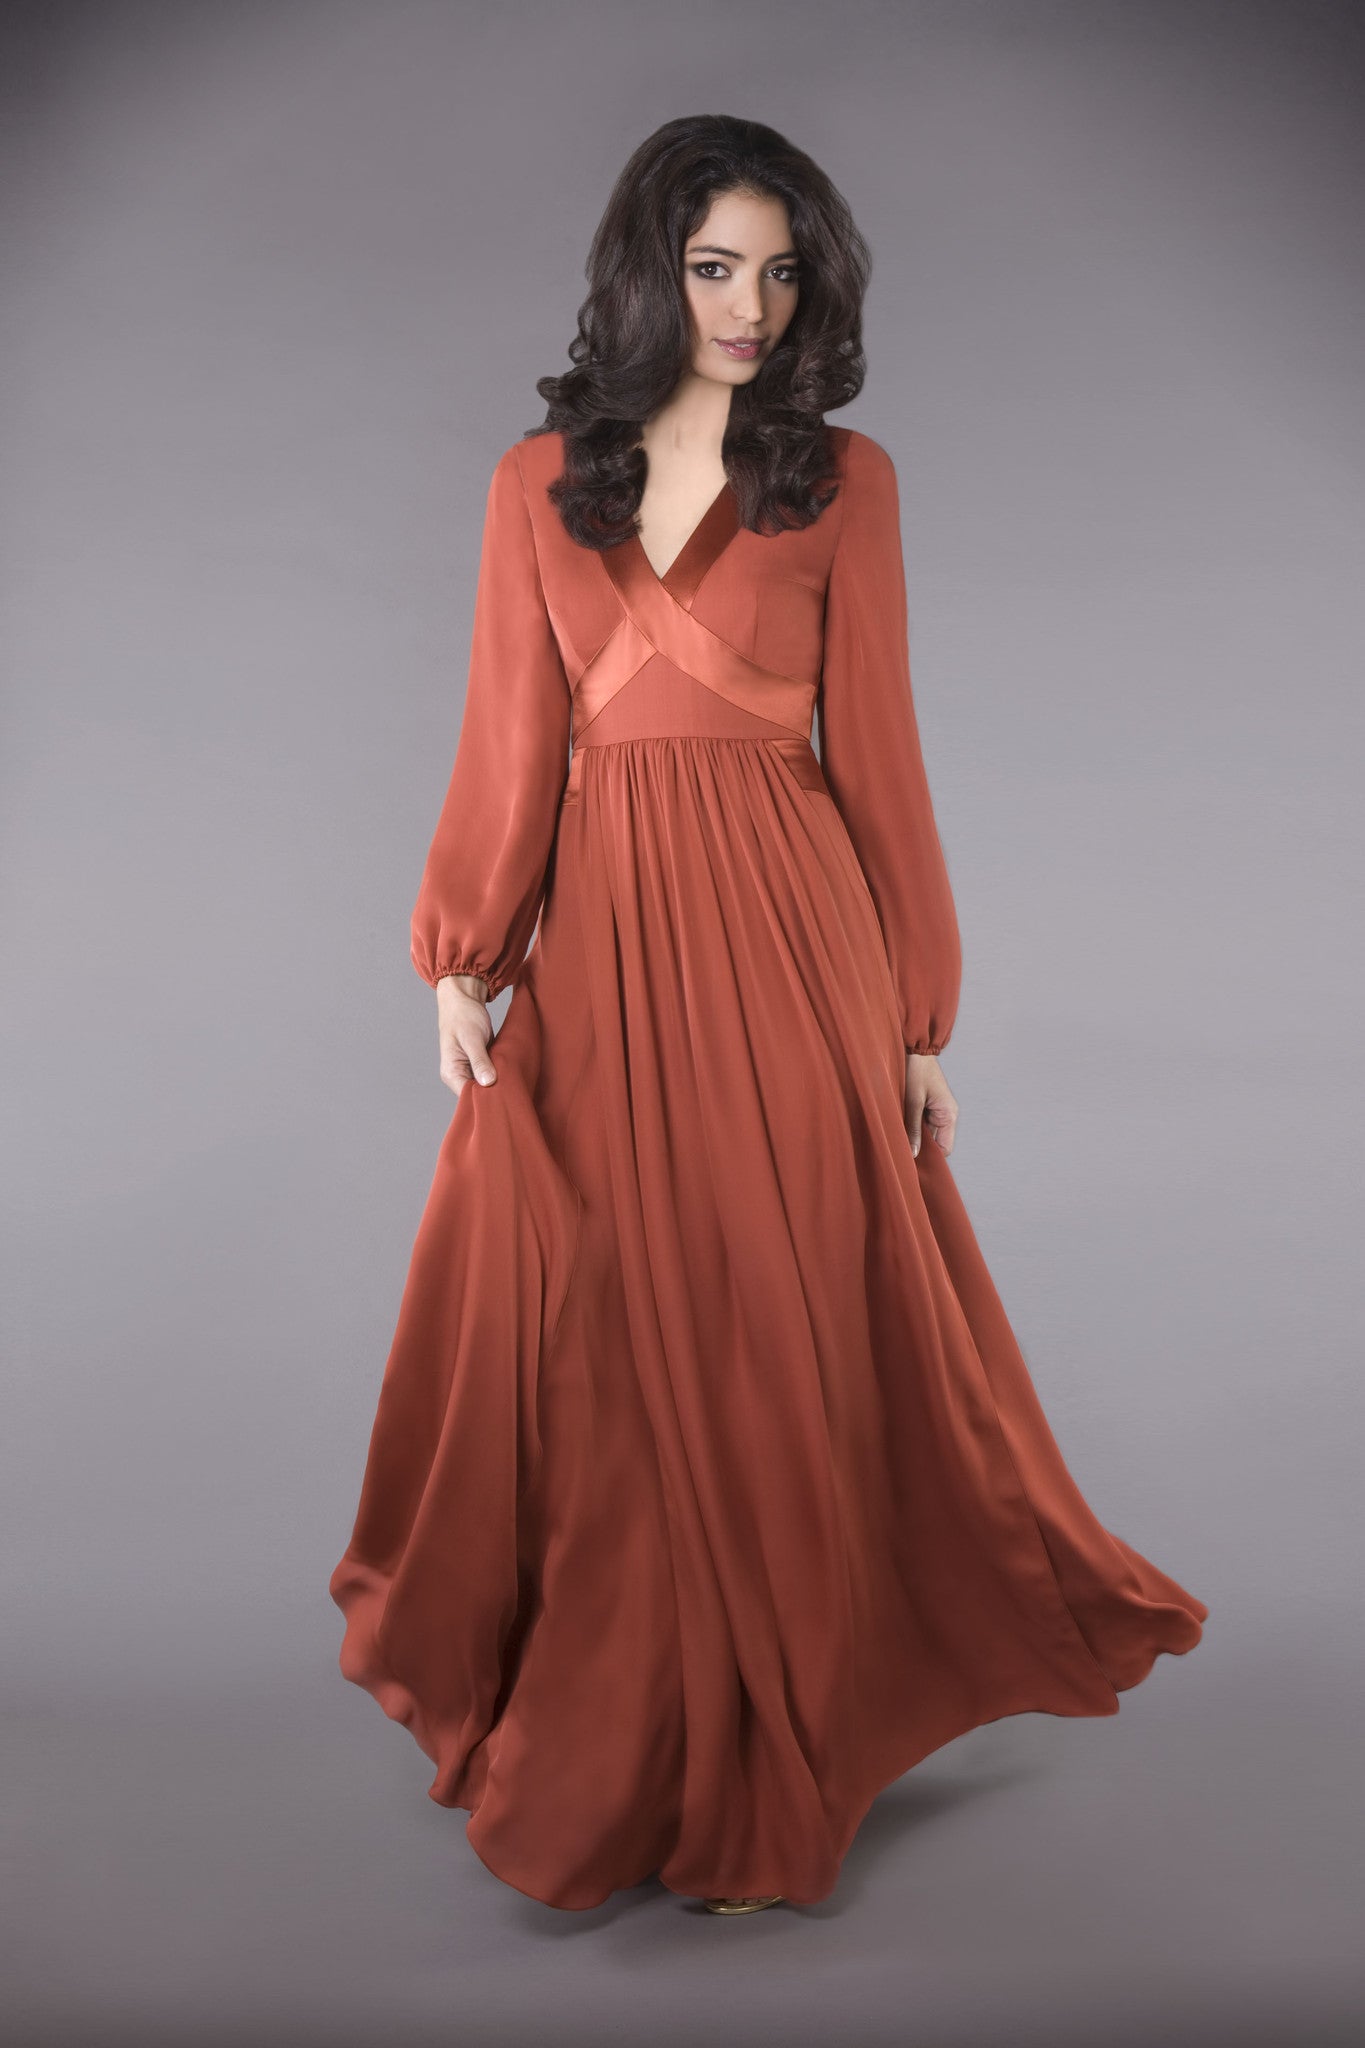 100% silk gown, long billowing sleeves, elegantly crisscrossed V-neckline, falls into a graceful hem sweep. Modest and classic